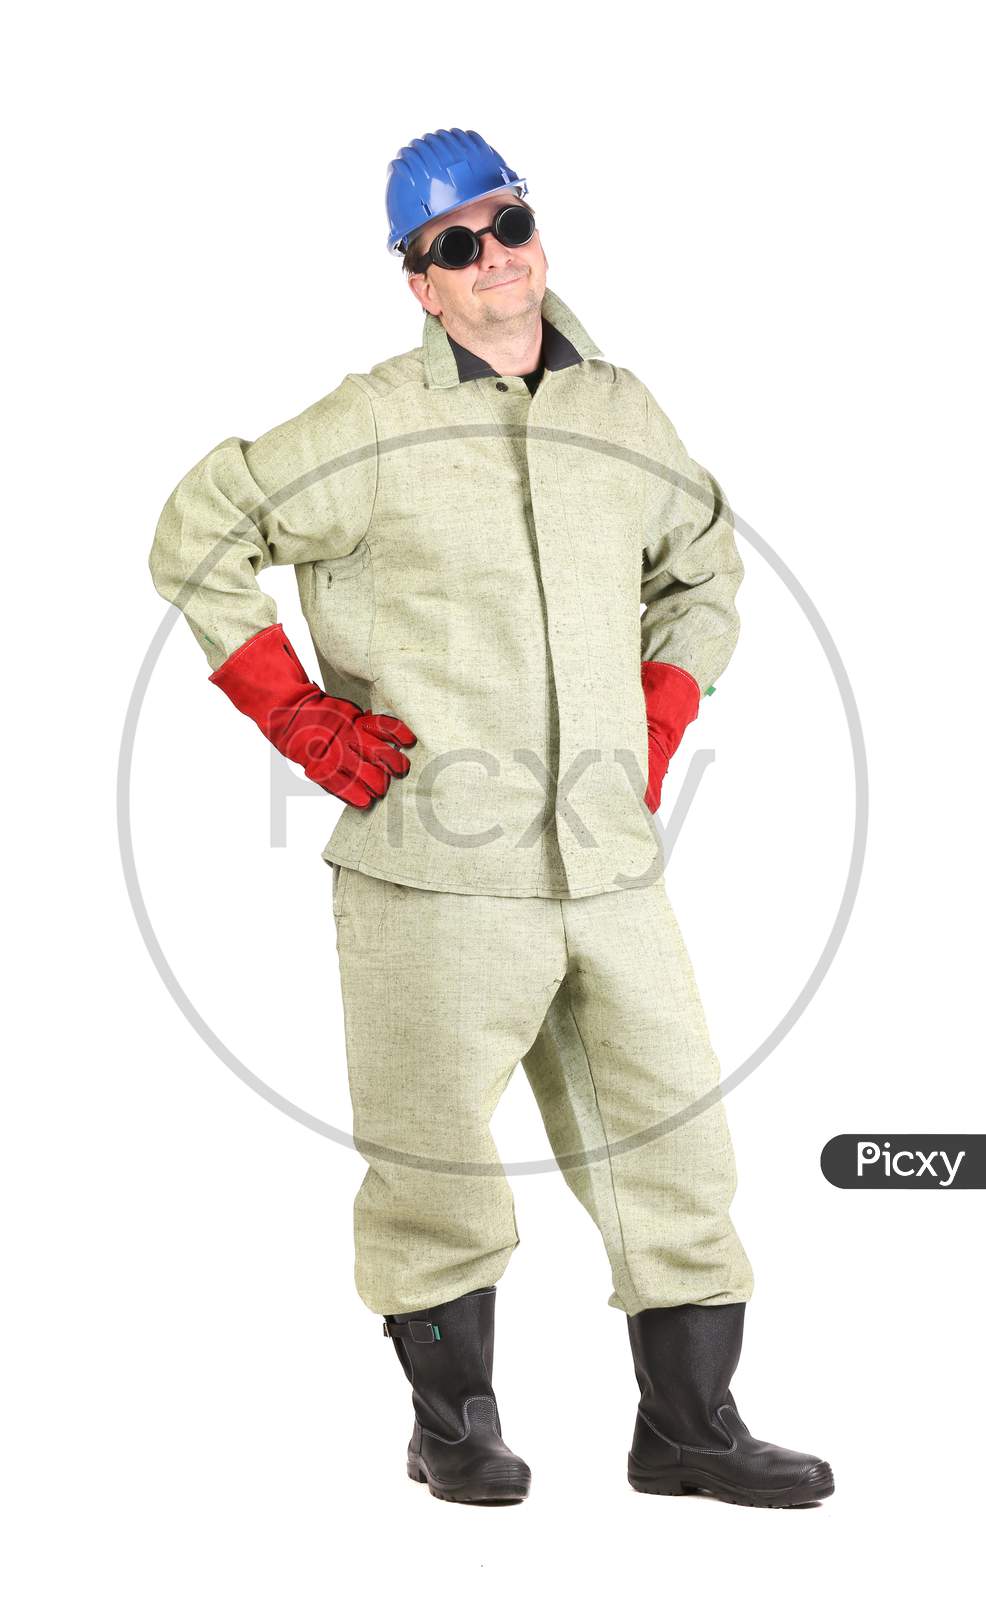 Welder With Arms On Waist. Isolated On A White Background.